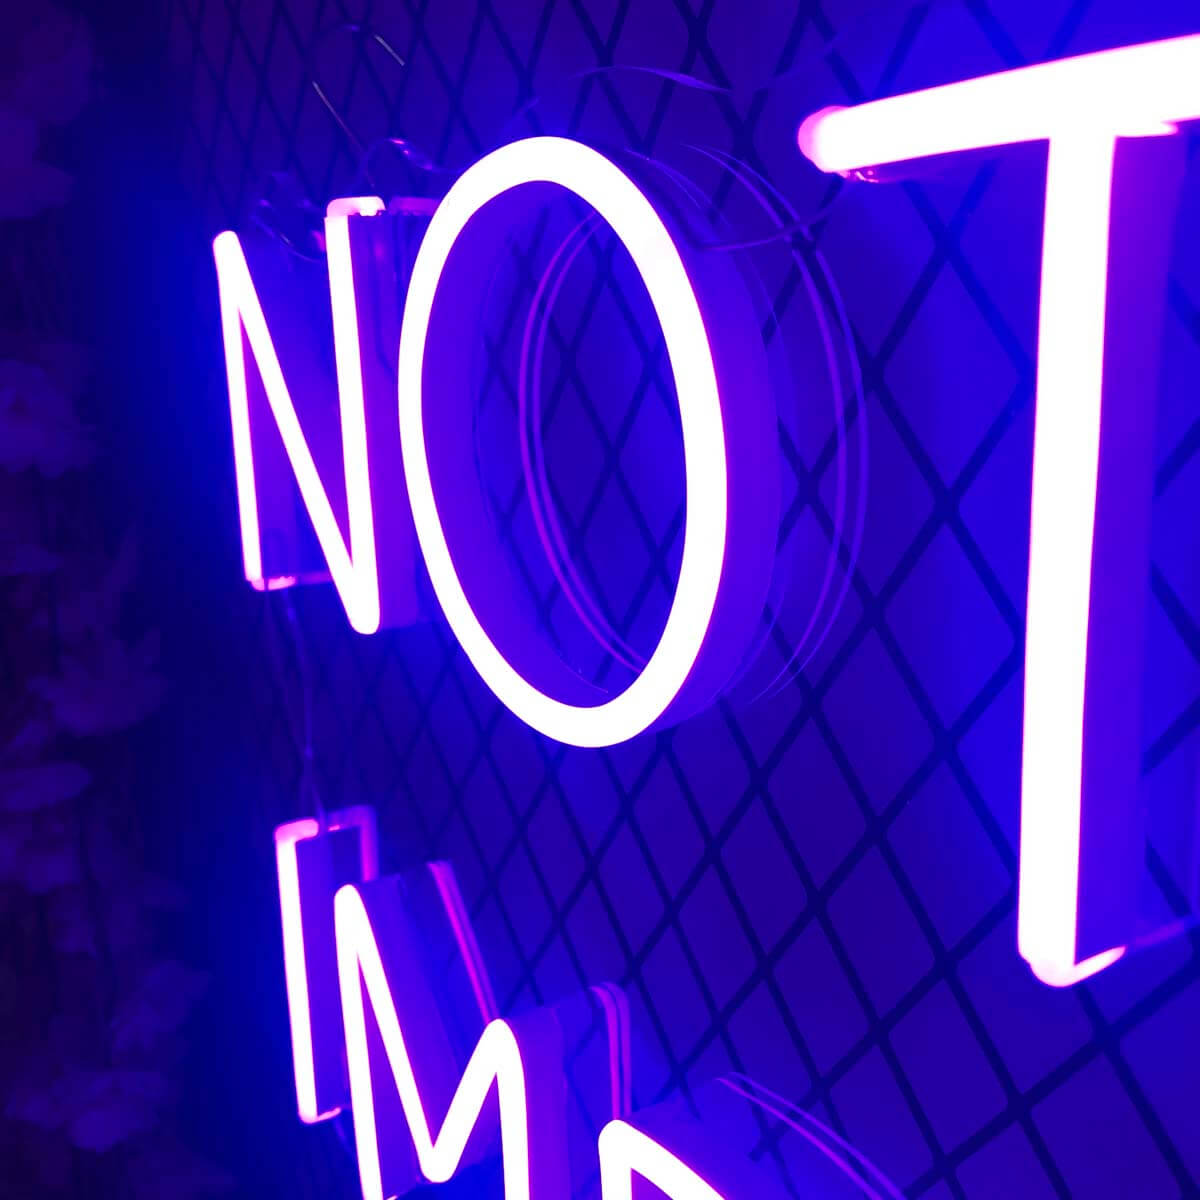 NOTHING IS IMPOSSIBLE Neon Signs